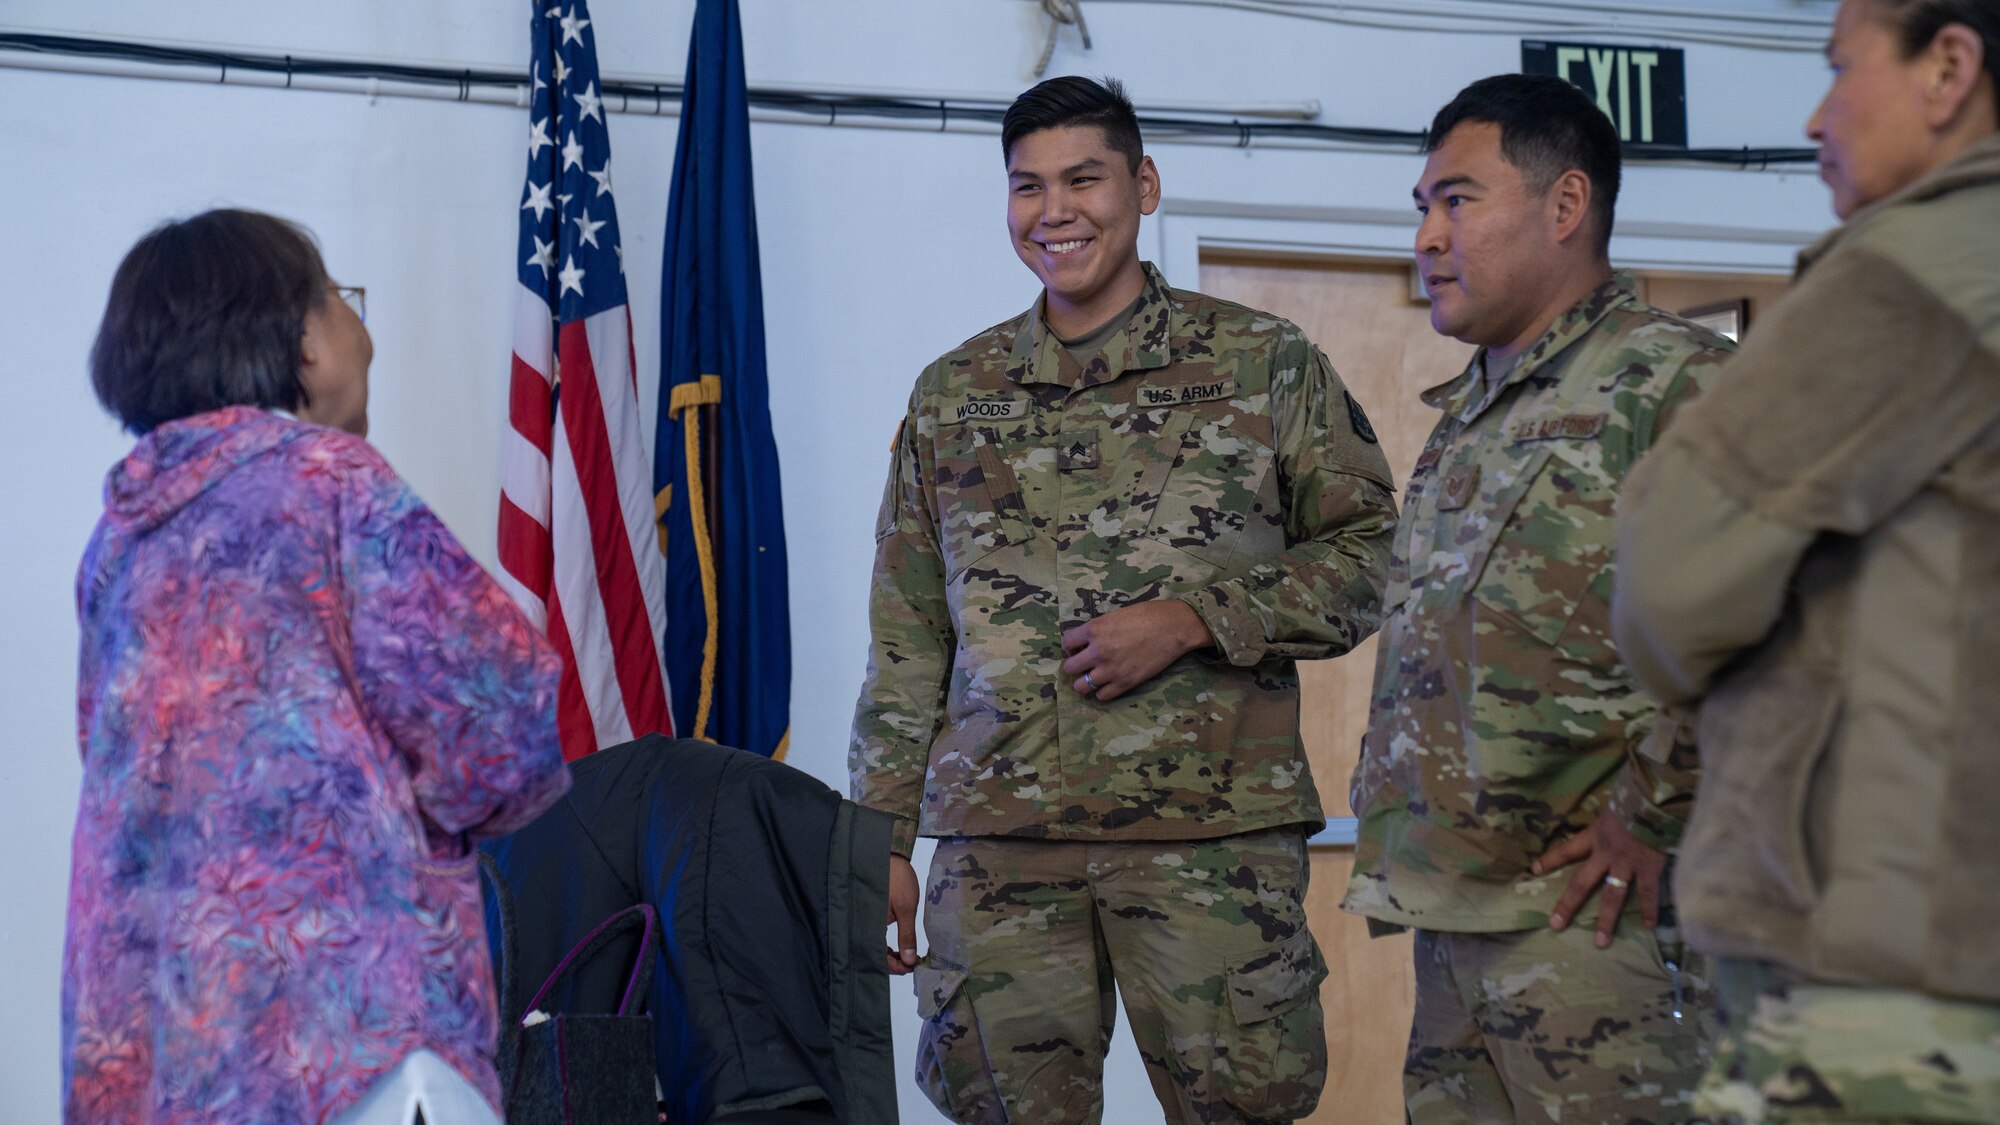 Bernedette Alvanna Stimpfle, director of the Alaska Native Language Preservation and Advisory Council, reunites with Sgt. Dempsey Woods and Tech Sgt. Blassi Shoogukwruk, former students of hers, during Operation Merbok Response, Sept. 21, 2022. Soldiers and Airmen of Joint Task Force-Nome during Operation Merbok Response, Sept. 21, 2022. More than 130 members of the Alaska Organized Militia, which includes members of the Alaska National Guard, Alaska State Defense Force and Alaska Naval Militia, were activated following a disaster declaration issued Sept. 17 after the remnants of Typhoon Merbok caused dramatic flooding across more than 1,000 miles of Alaskan coastline. (Alaska Army National Guard photo by Pfc. Bradford Jackson)